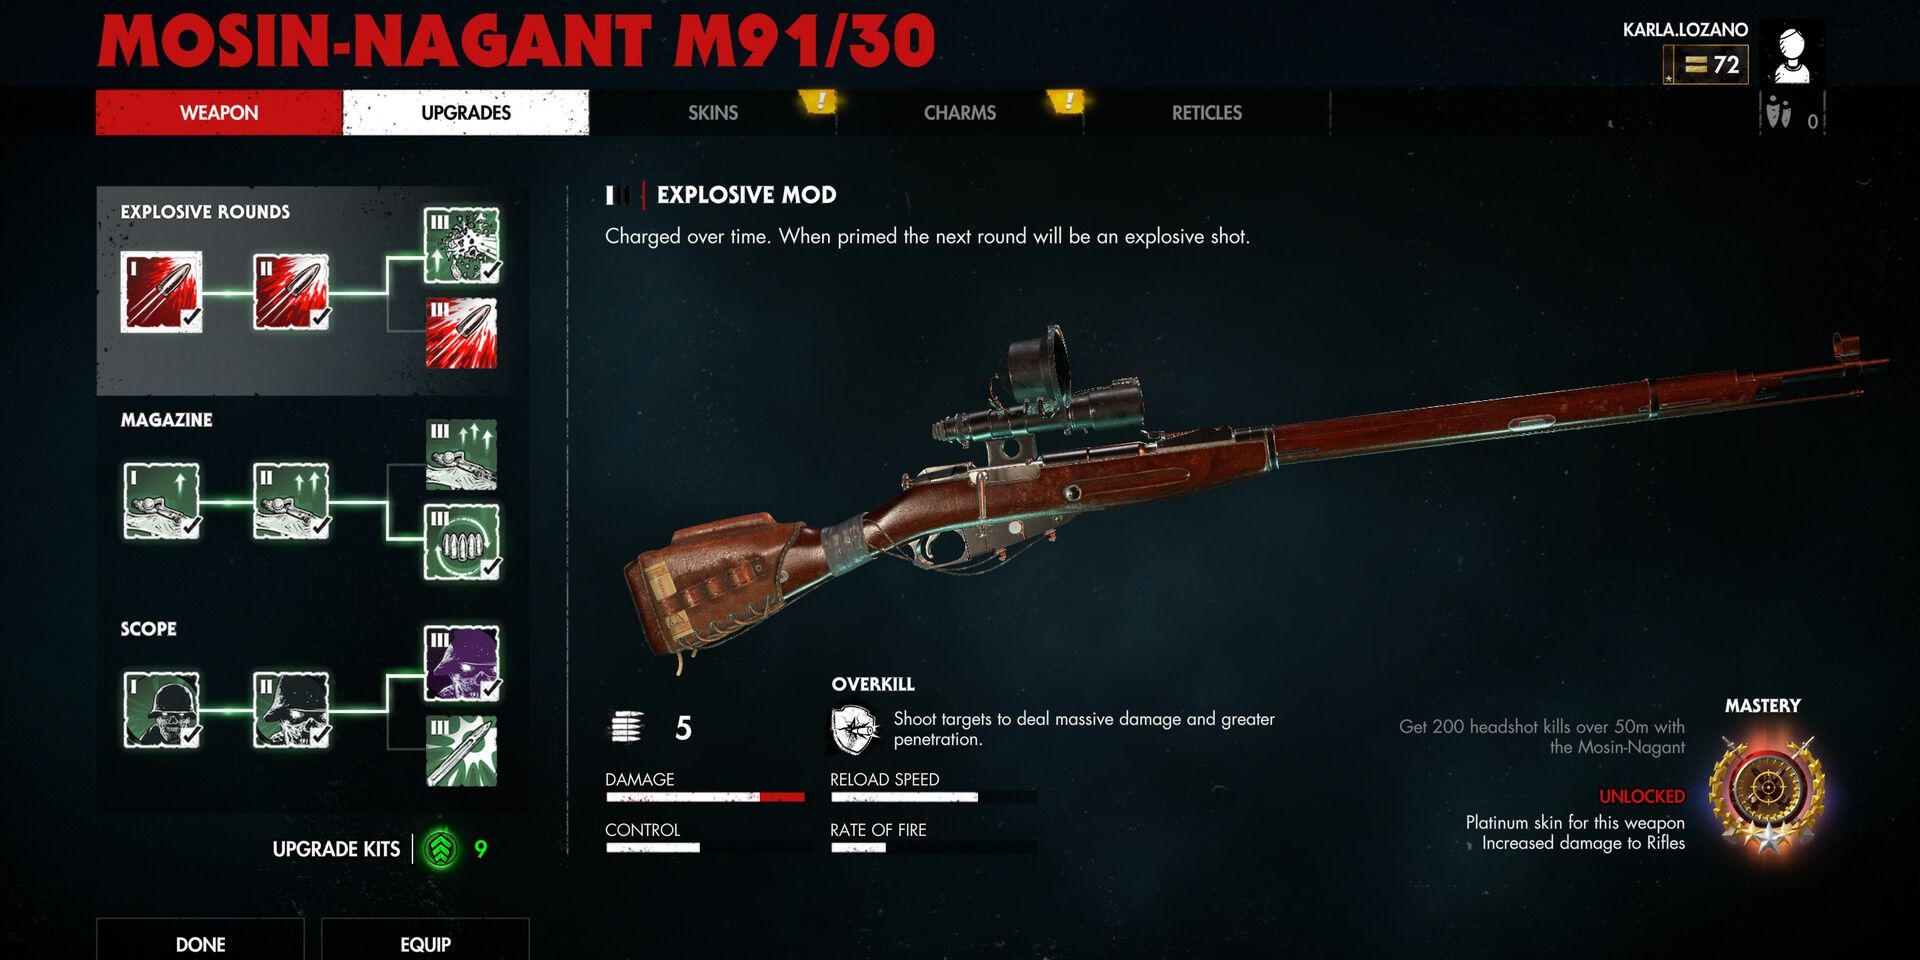 A screenshot showing available upgrades for the Mosin-Nagant M91/30 rifle in Zombie Army 4: Dead War